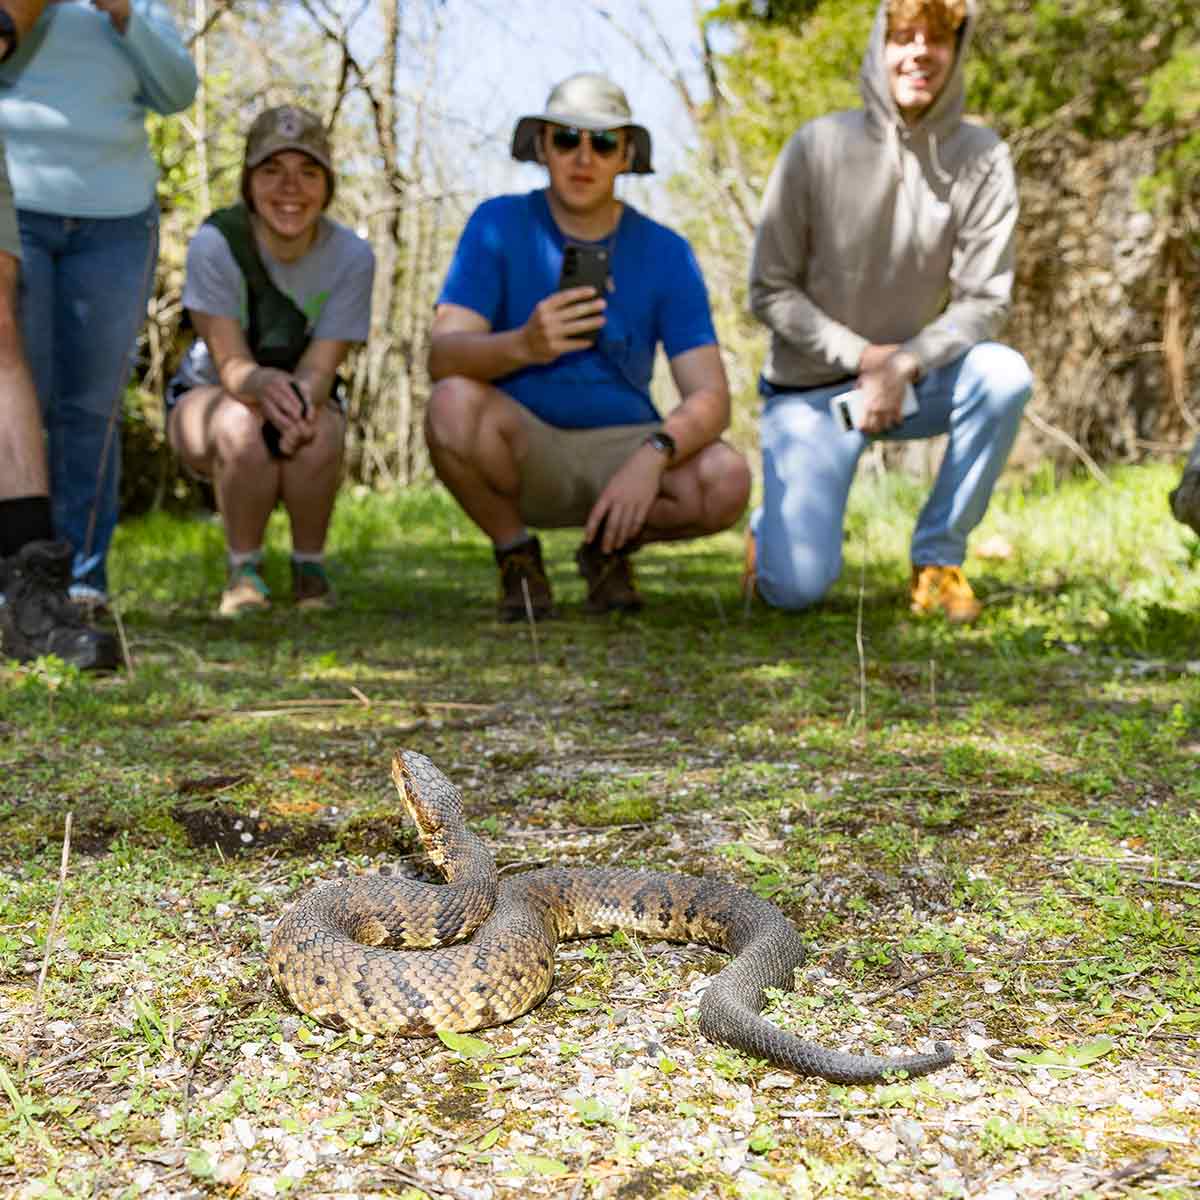 Biology students on a field look in awe at a snake coiled on the ground.